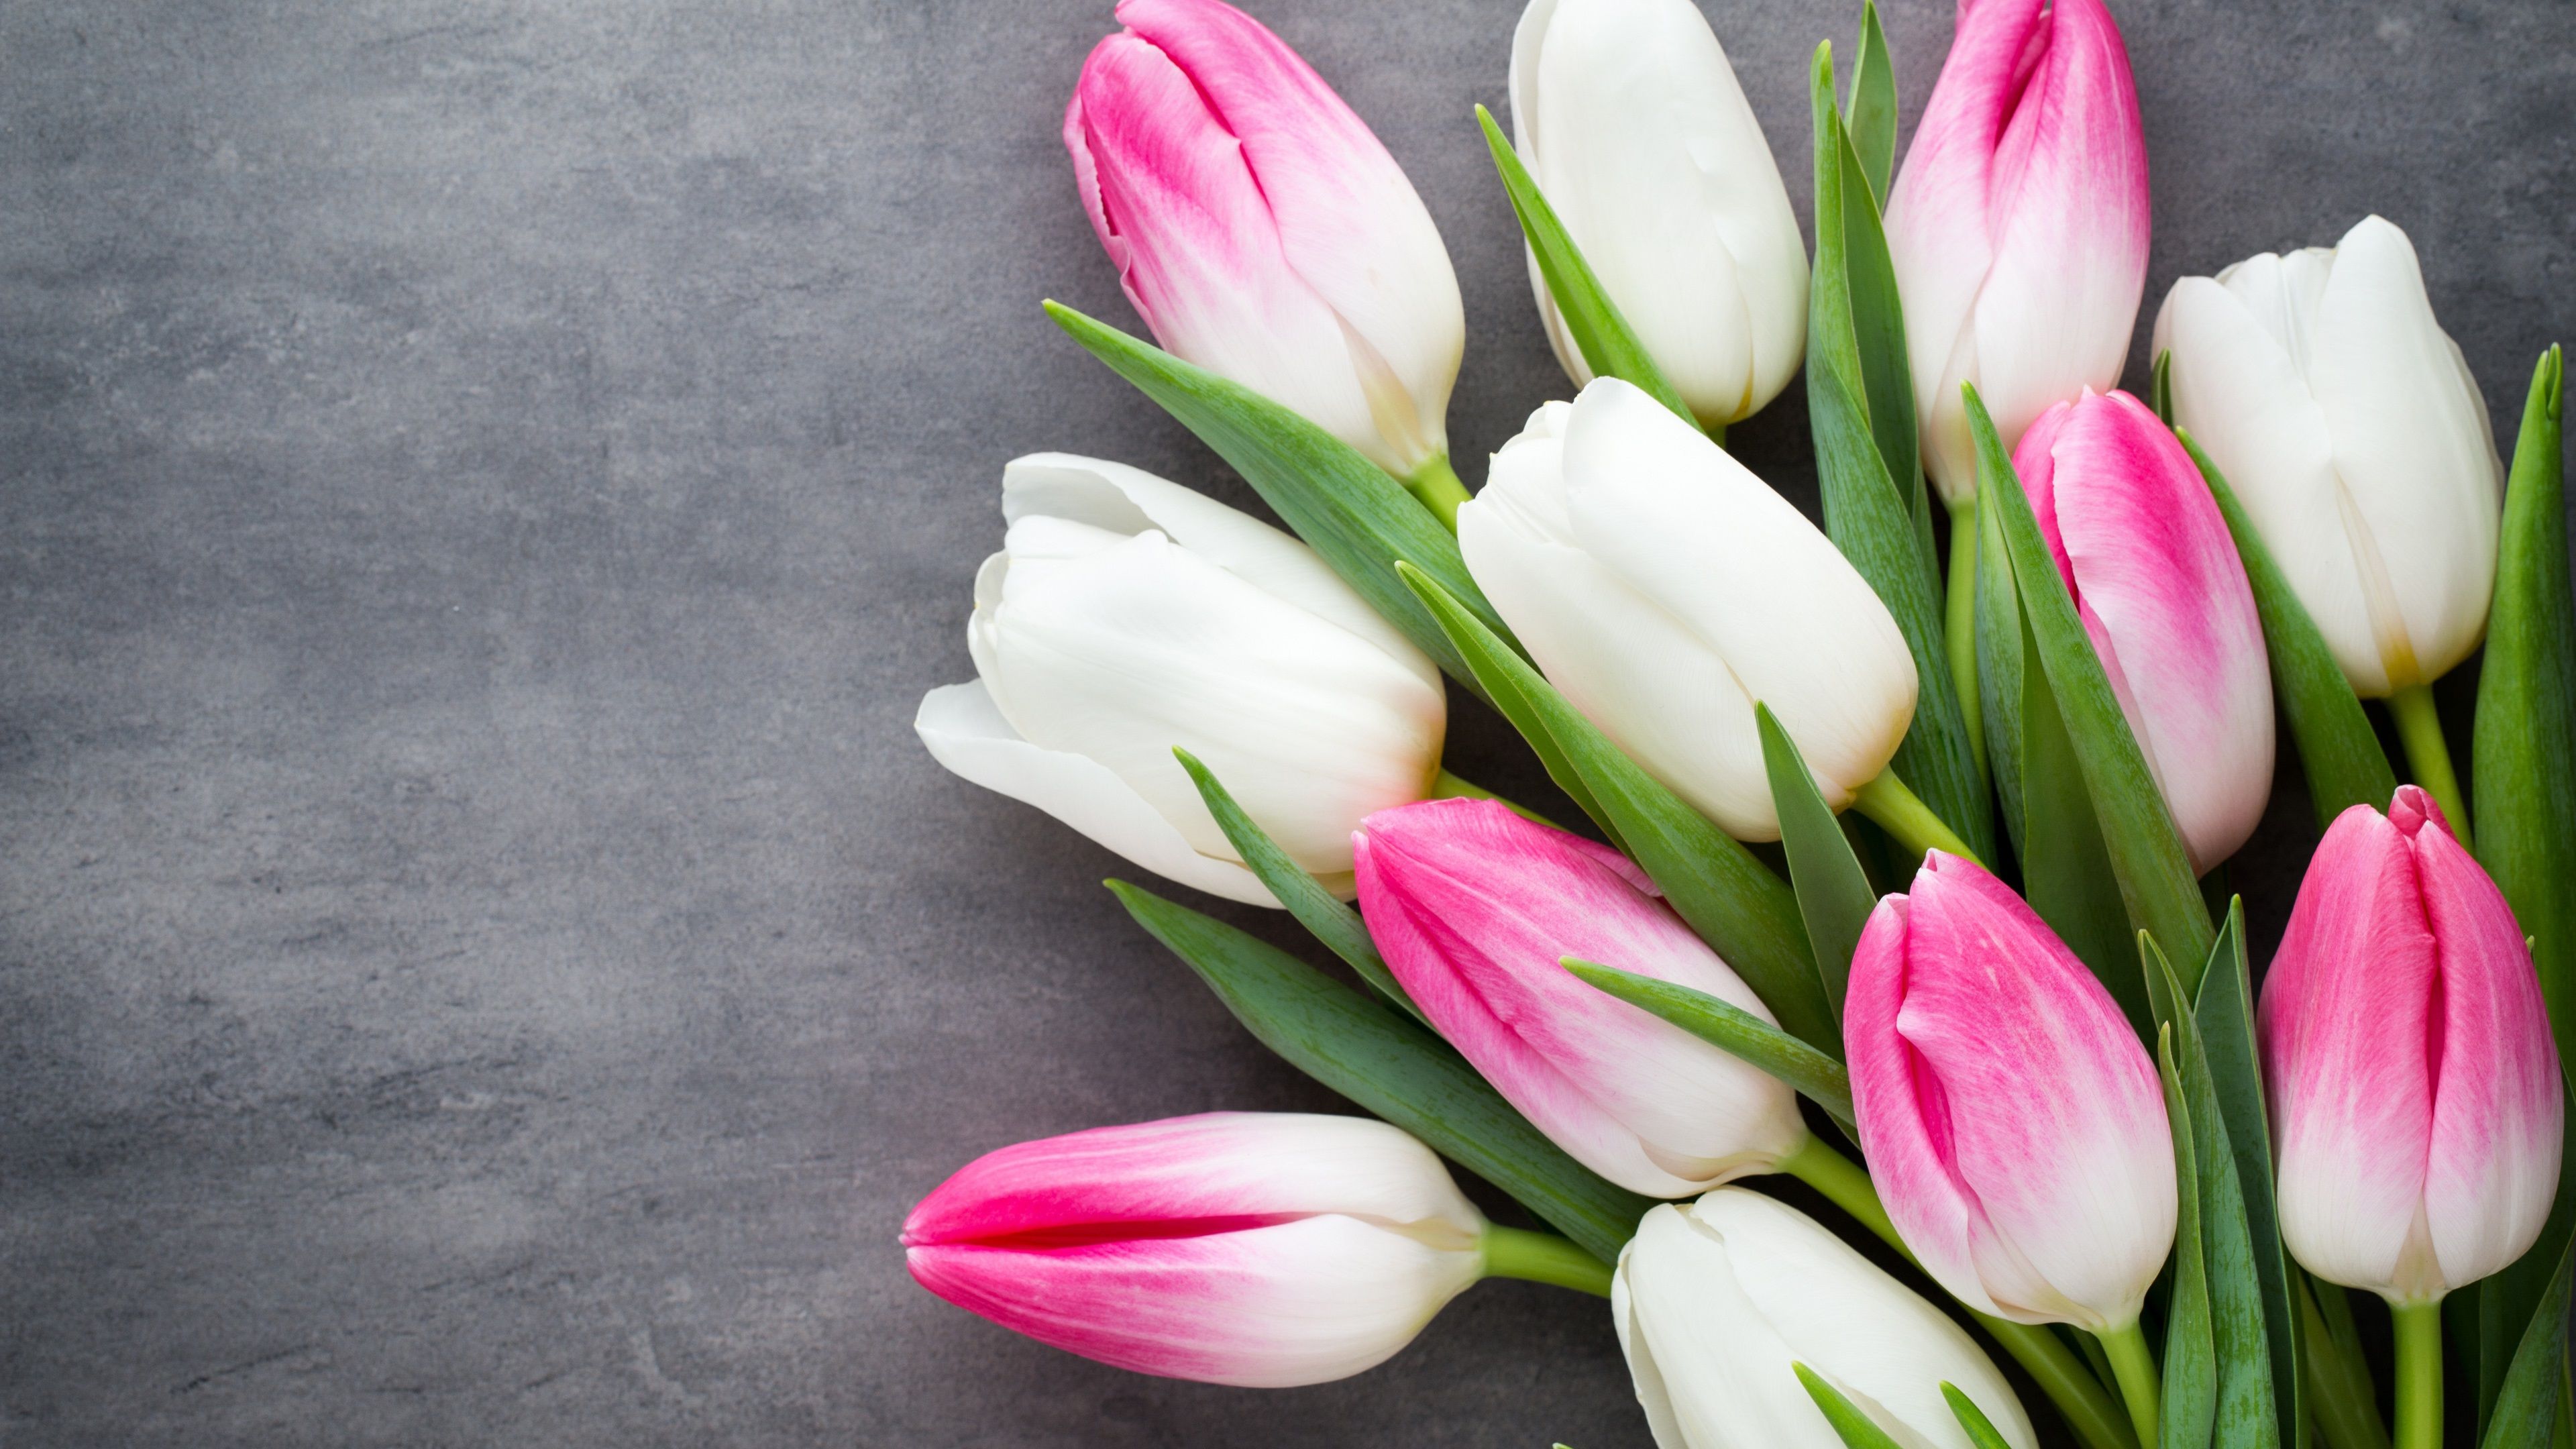 Wallpaper Beautiful tulips, pink white petals 3840x2160 UHD 4K Picture, Image